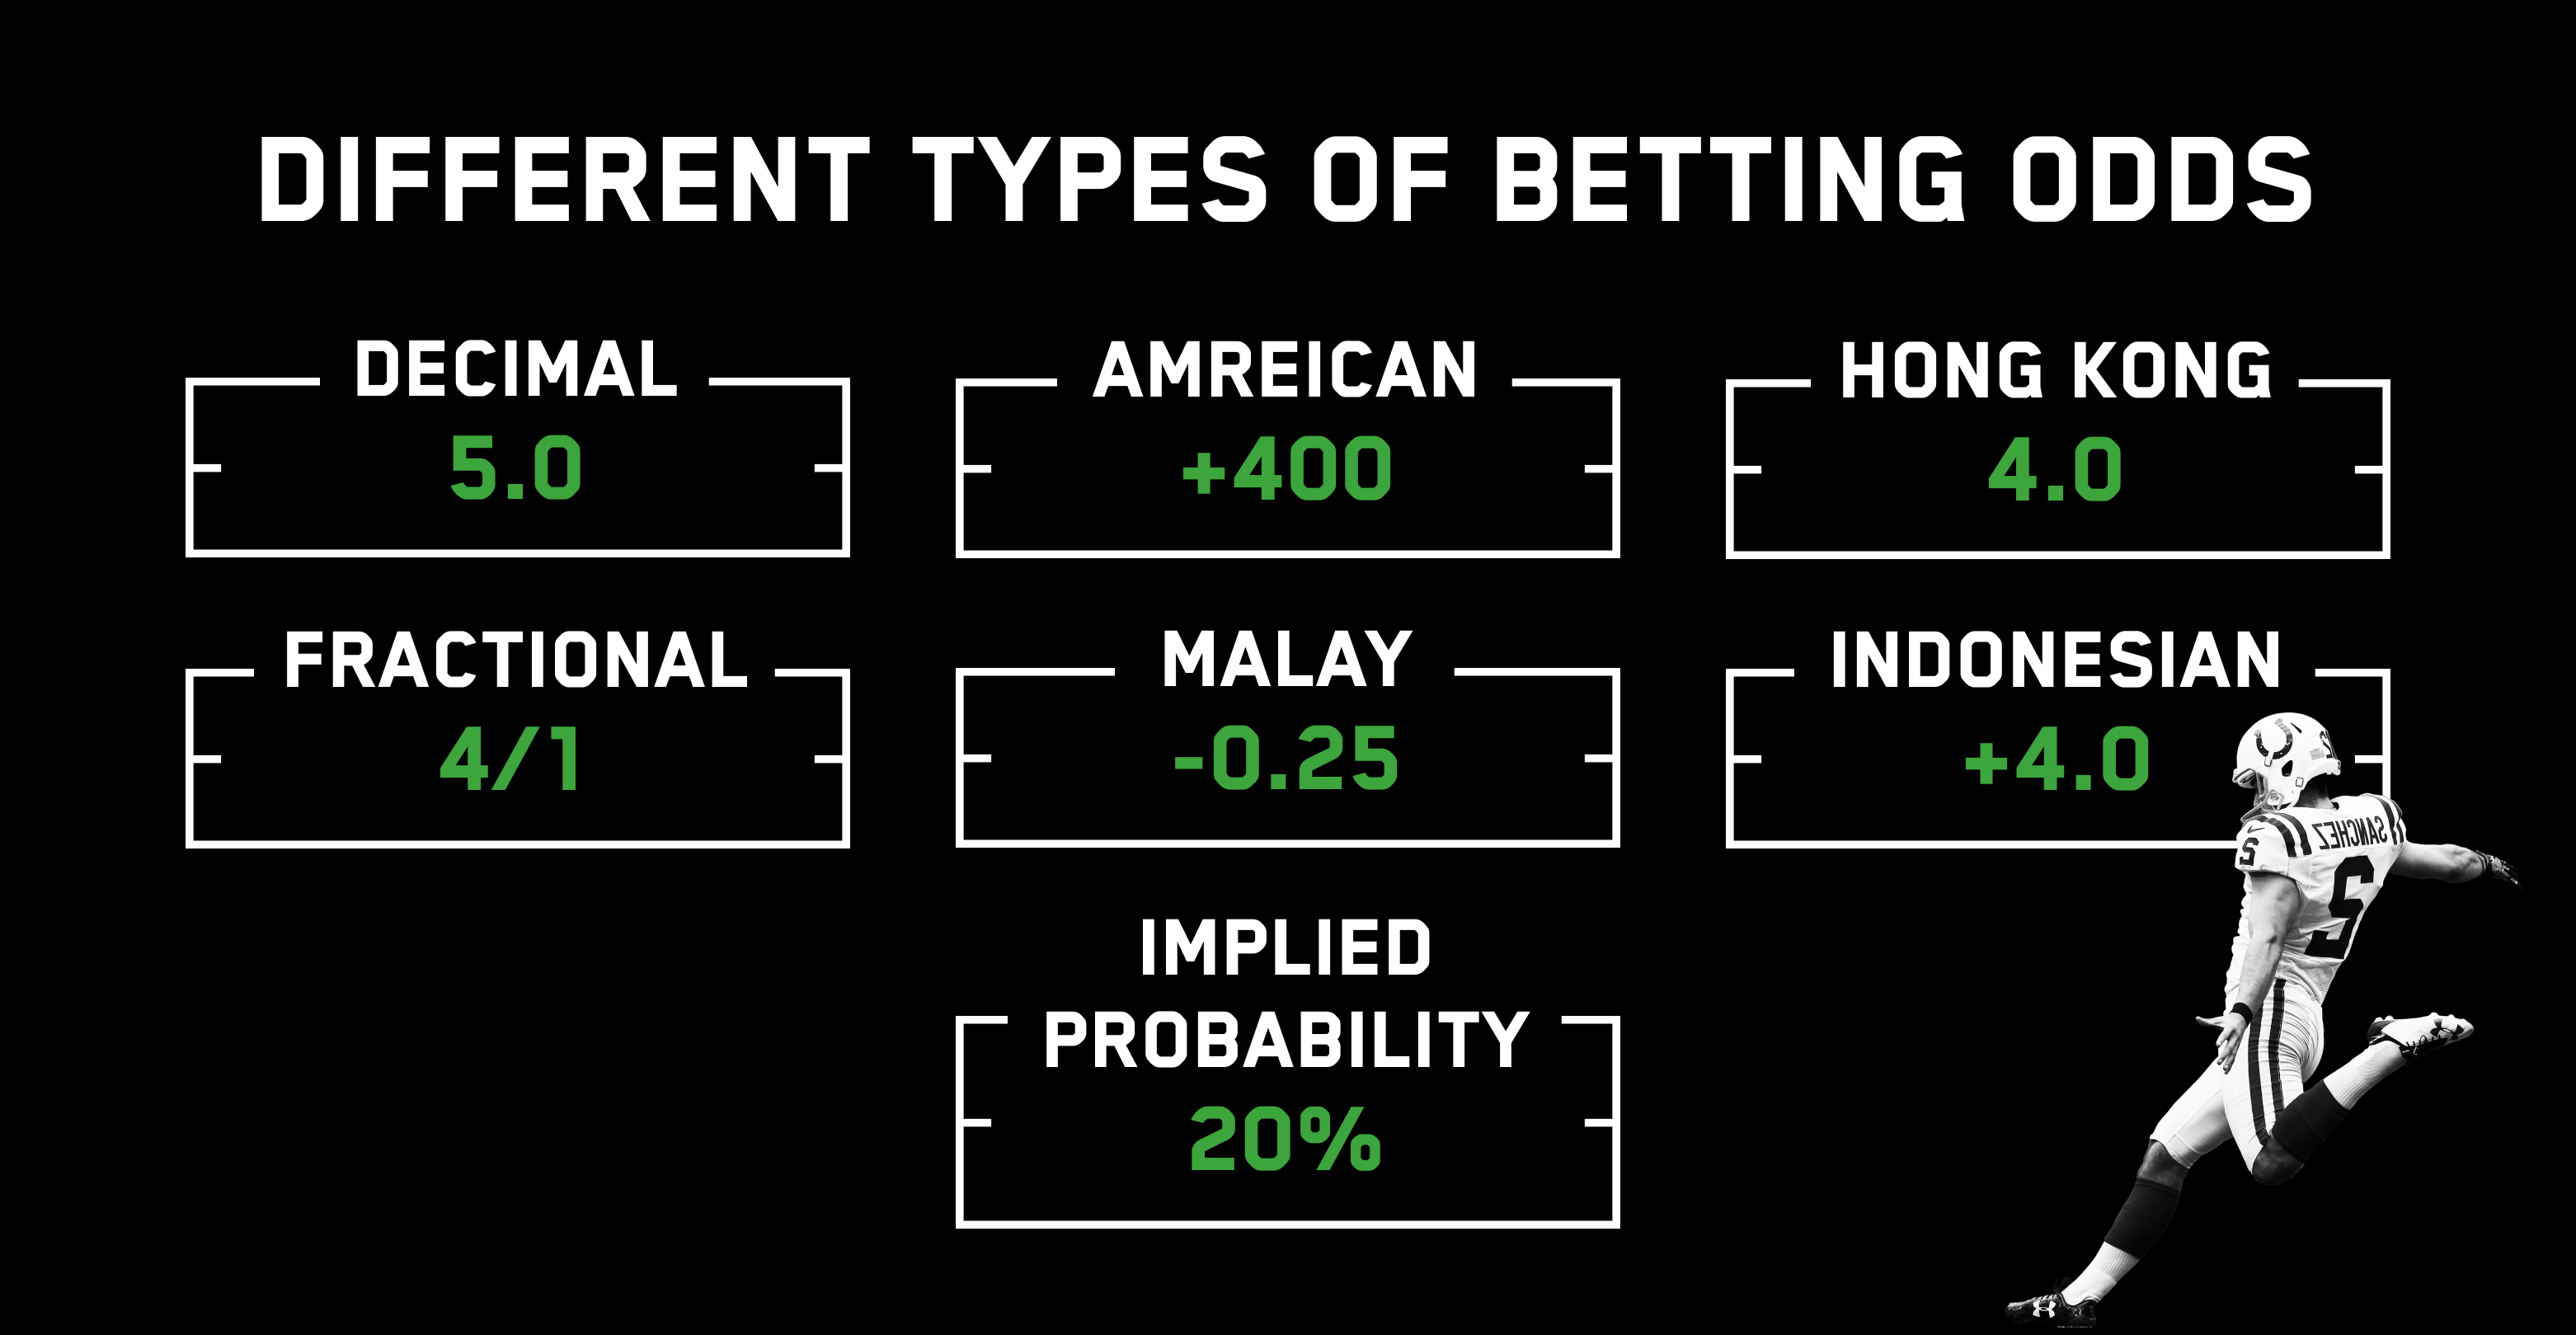 How to Win Betting on Sports - Sports Betting Tips to Win More